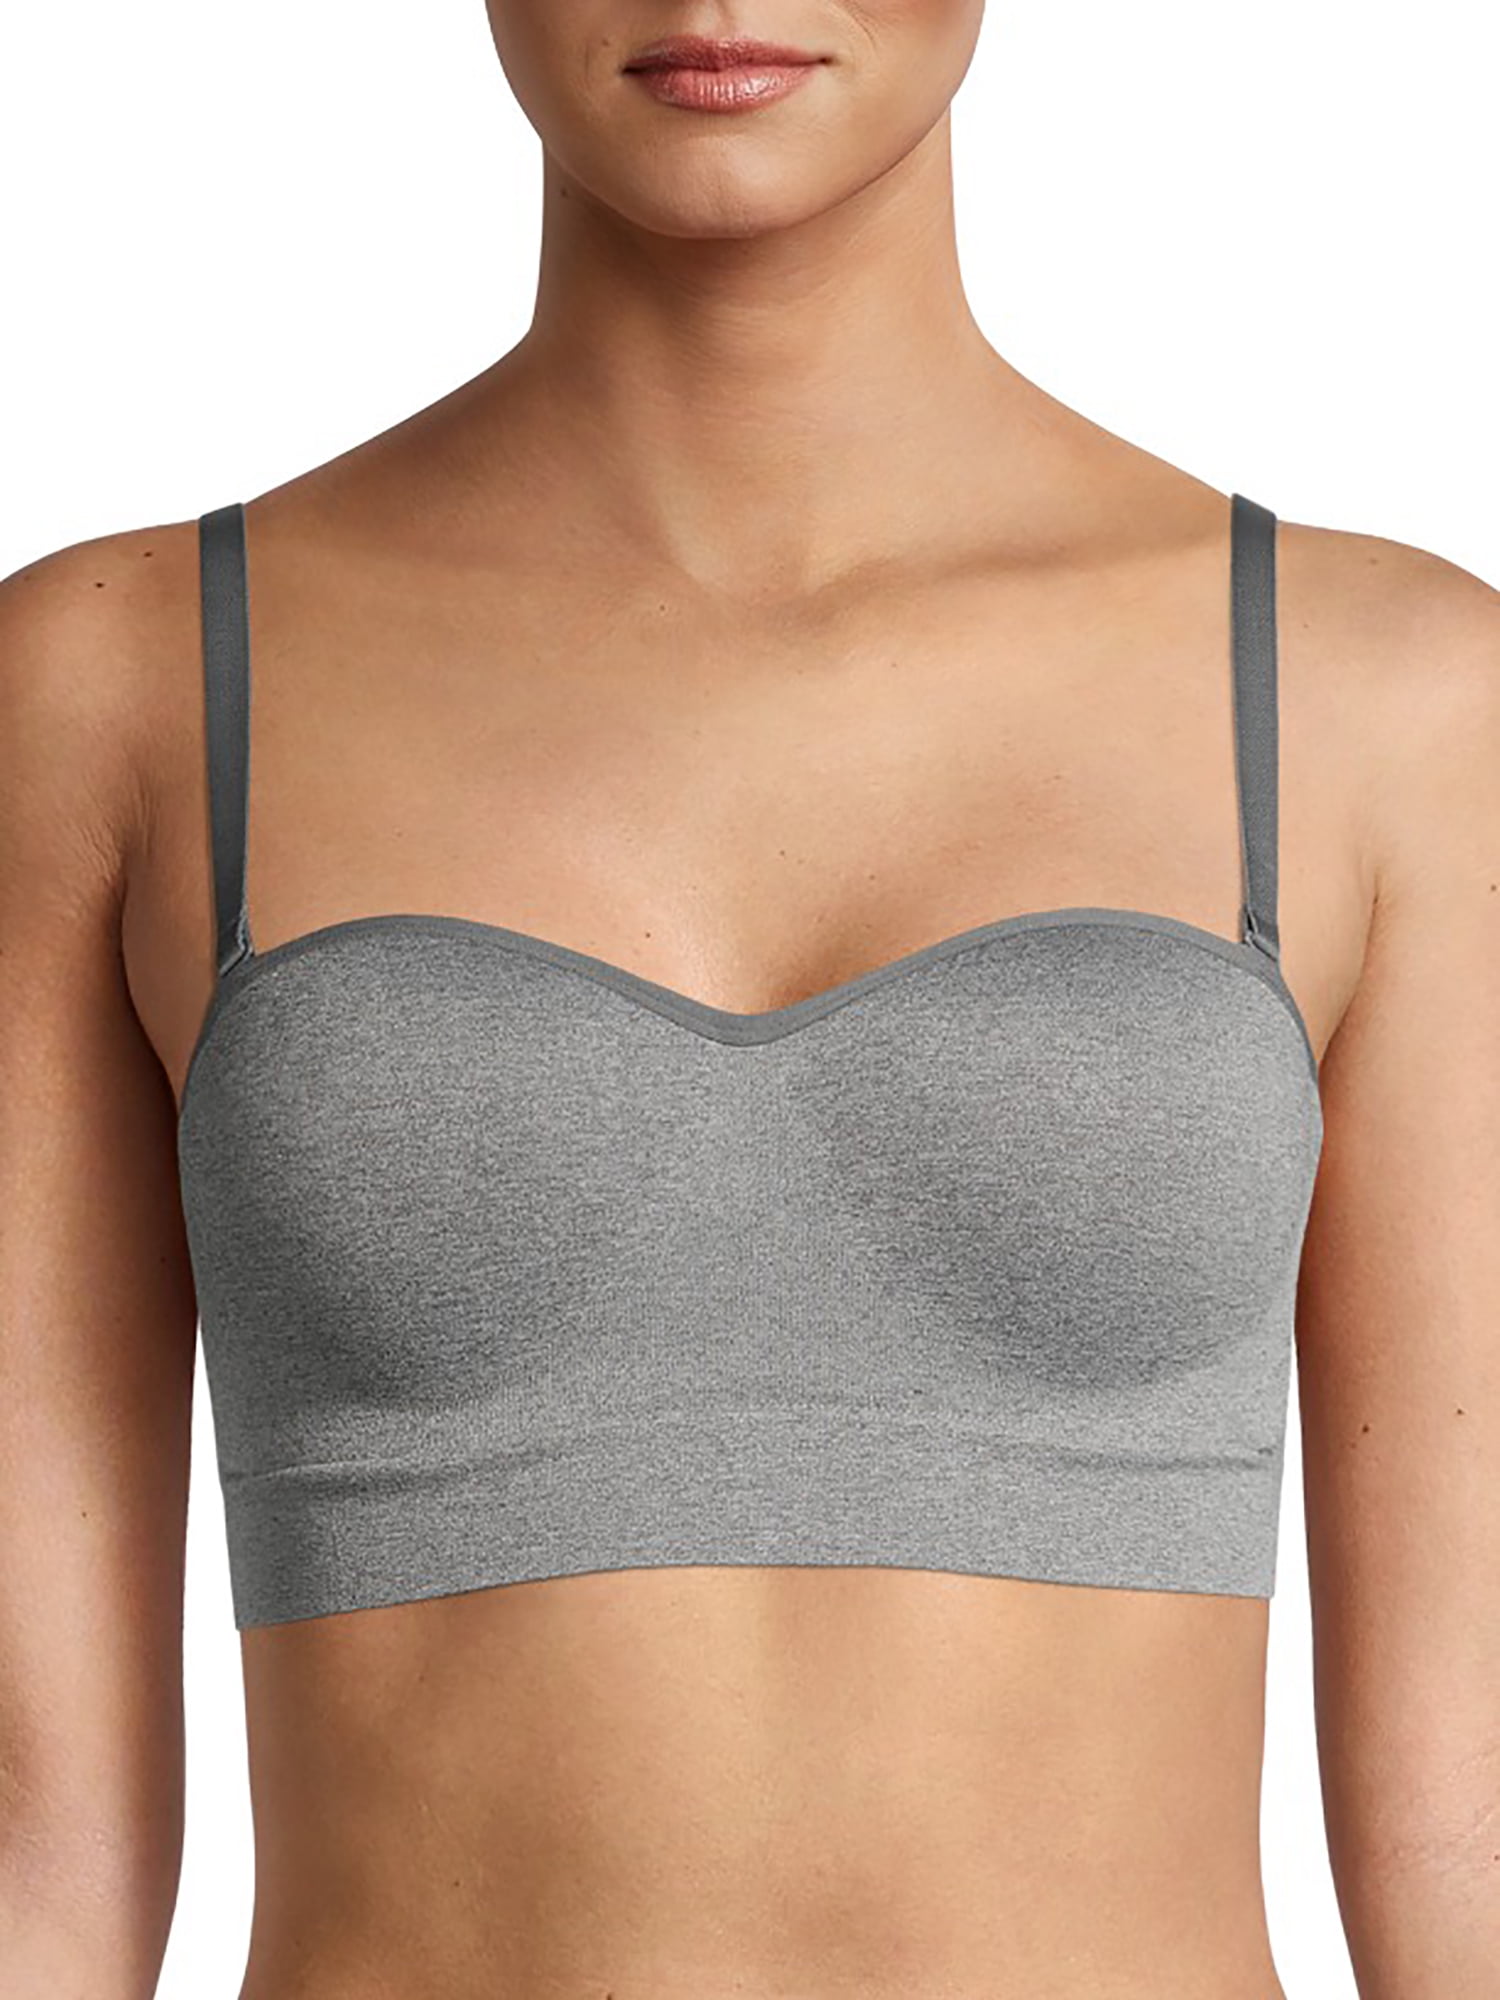 3-6 Bras Invisible CLEAR BACK & STRAPS Padded Push-ups Strapless T-Shirt Bra 854